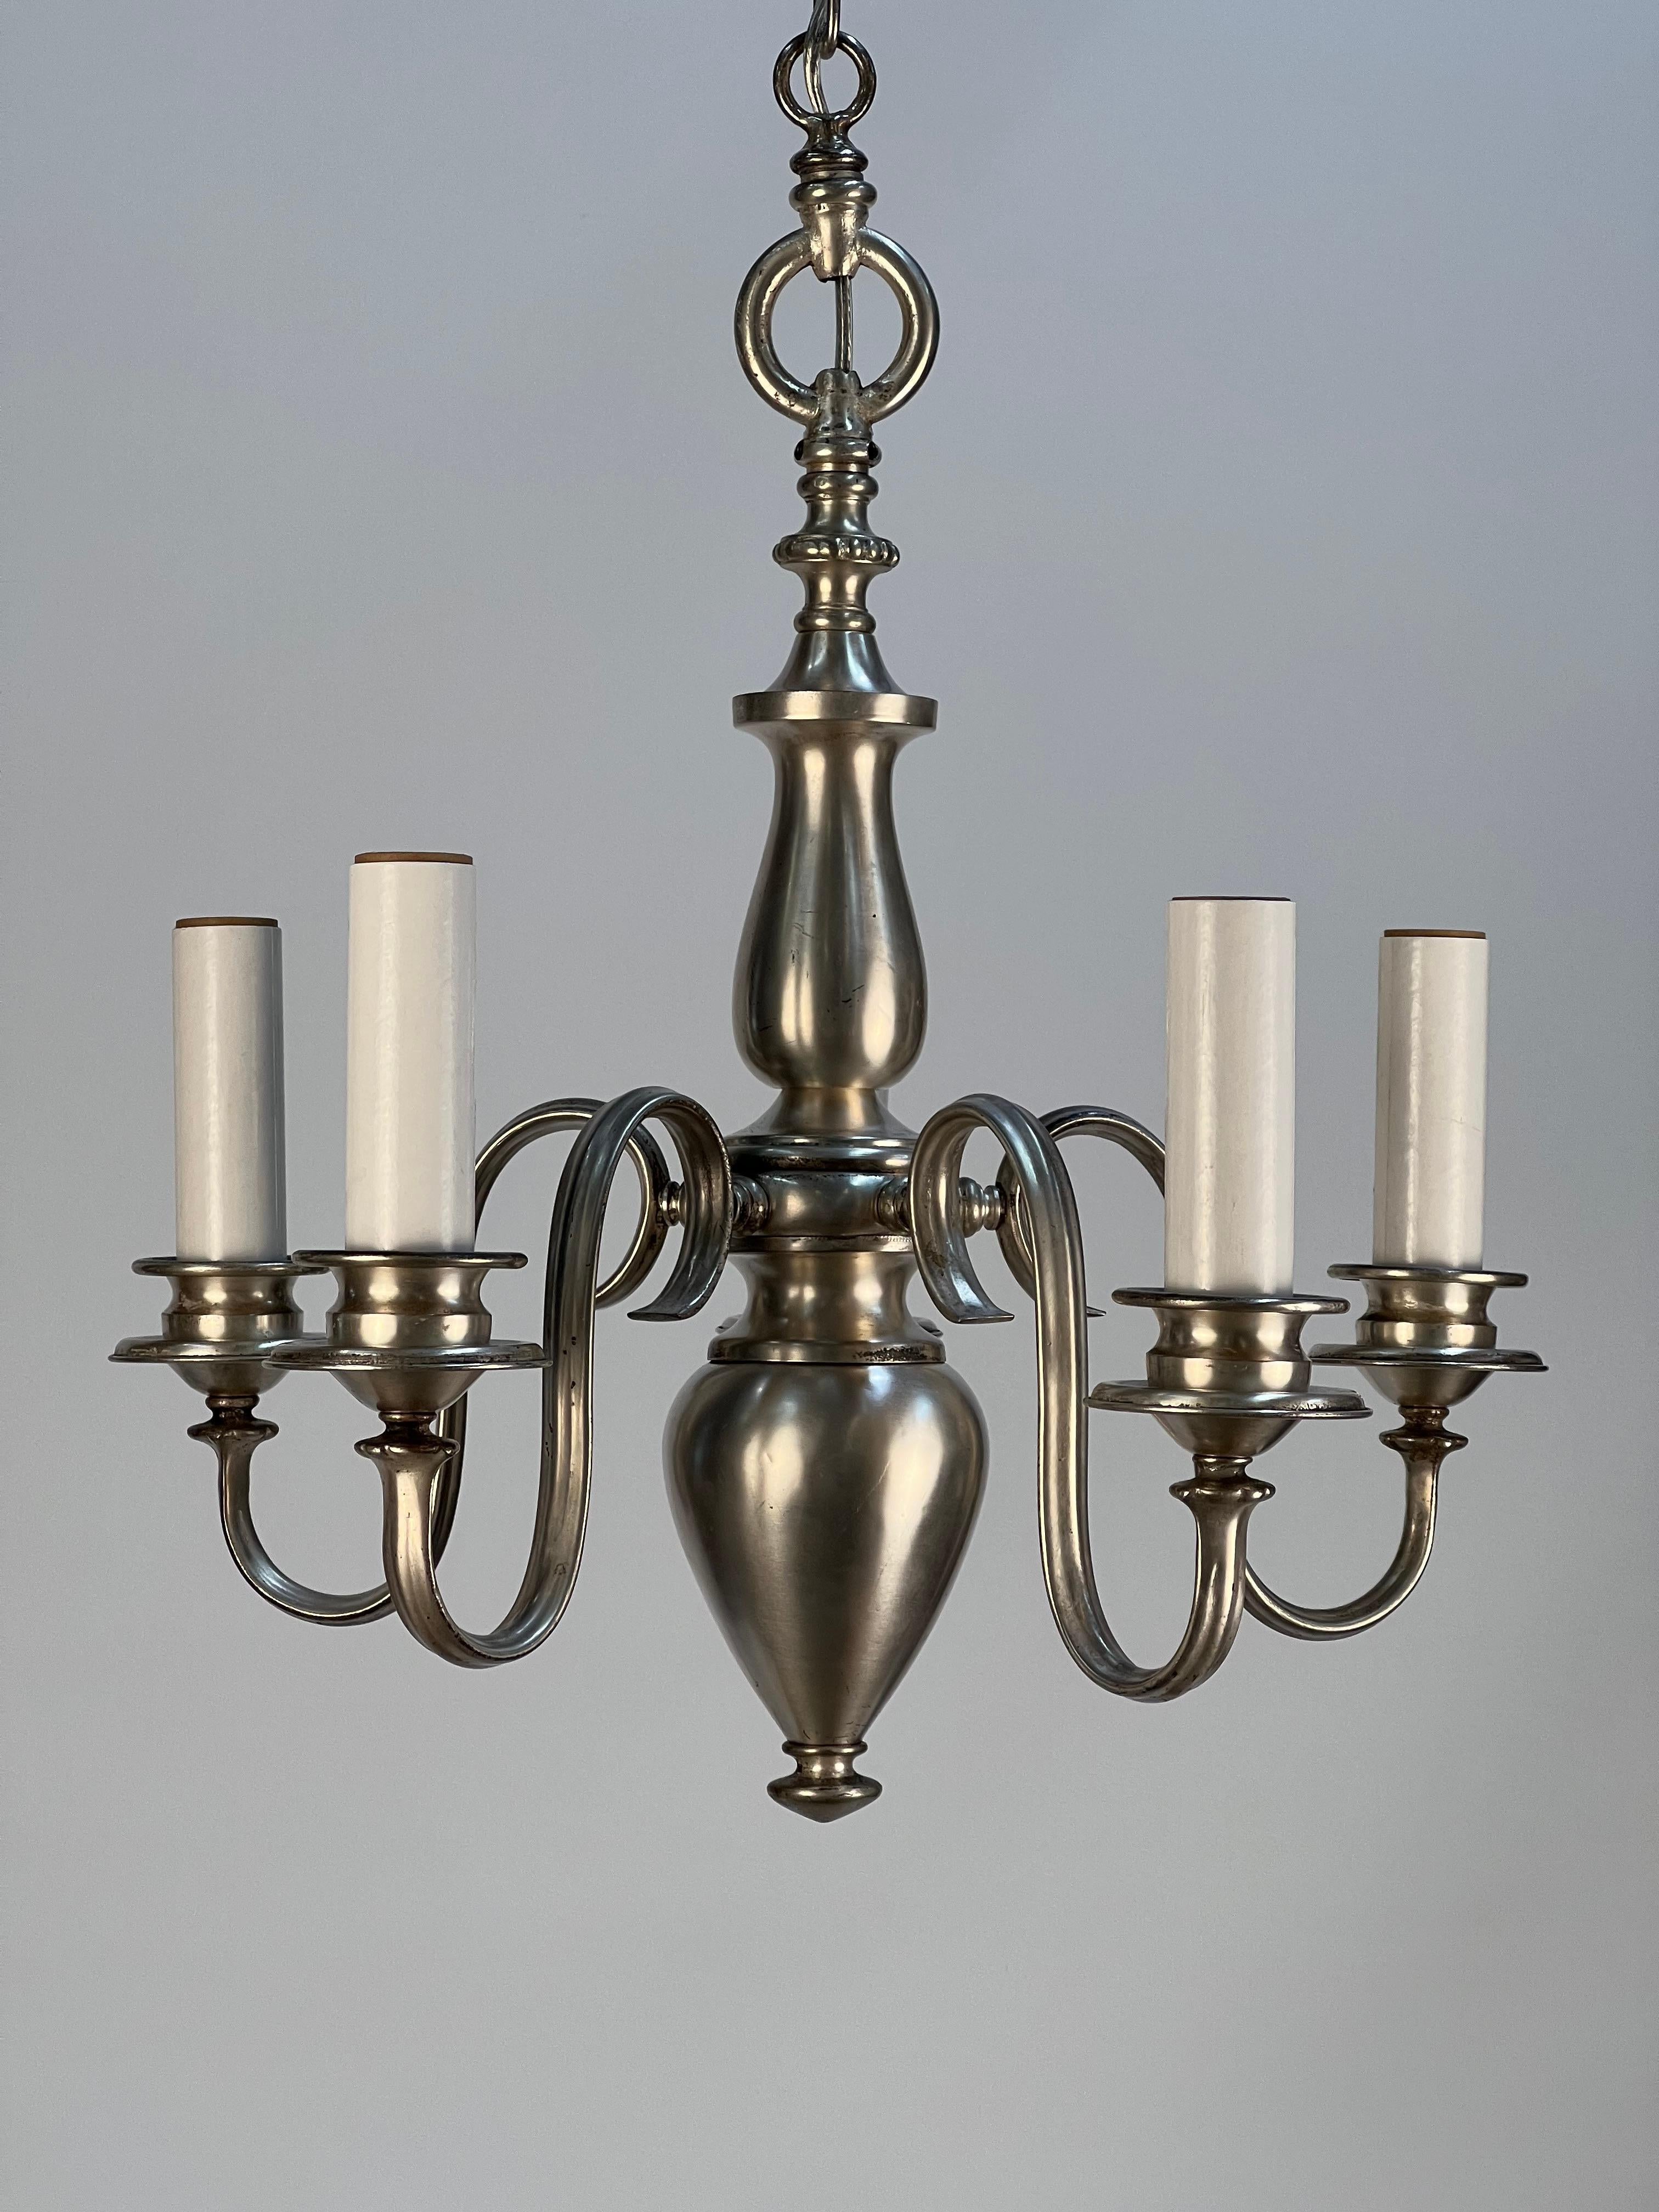 A high-end early 1920's silvered chandelier featuring five scrolled arms attached to a central arabesque body. The shapes and curves of the chandelier suggest quiet elegance and opulence. The patina of the silvered brass has aged with grace only